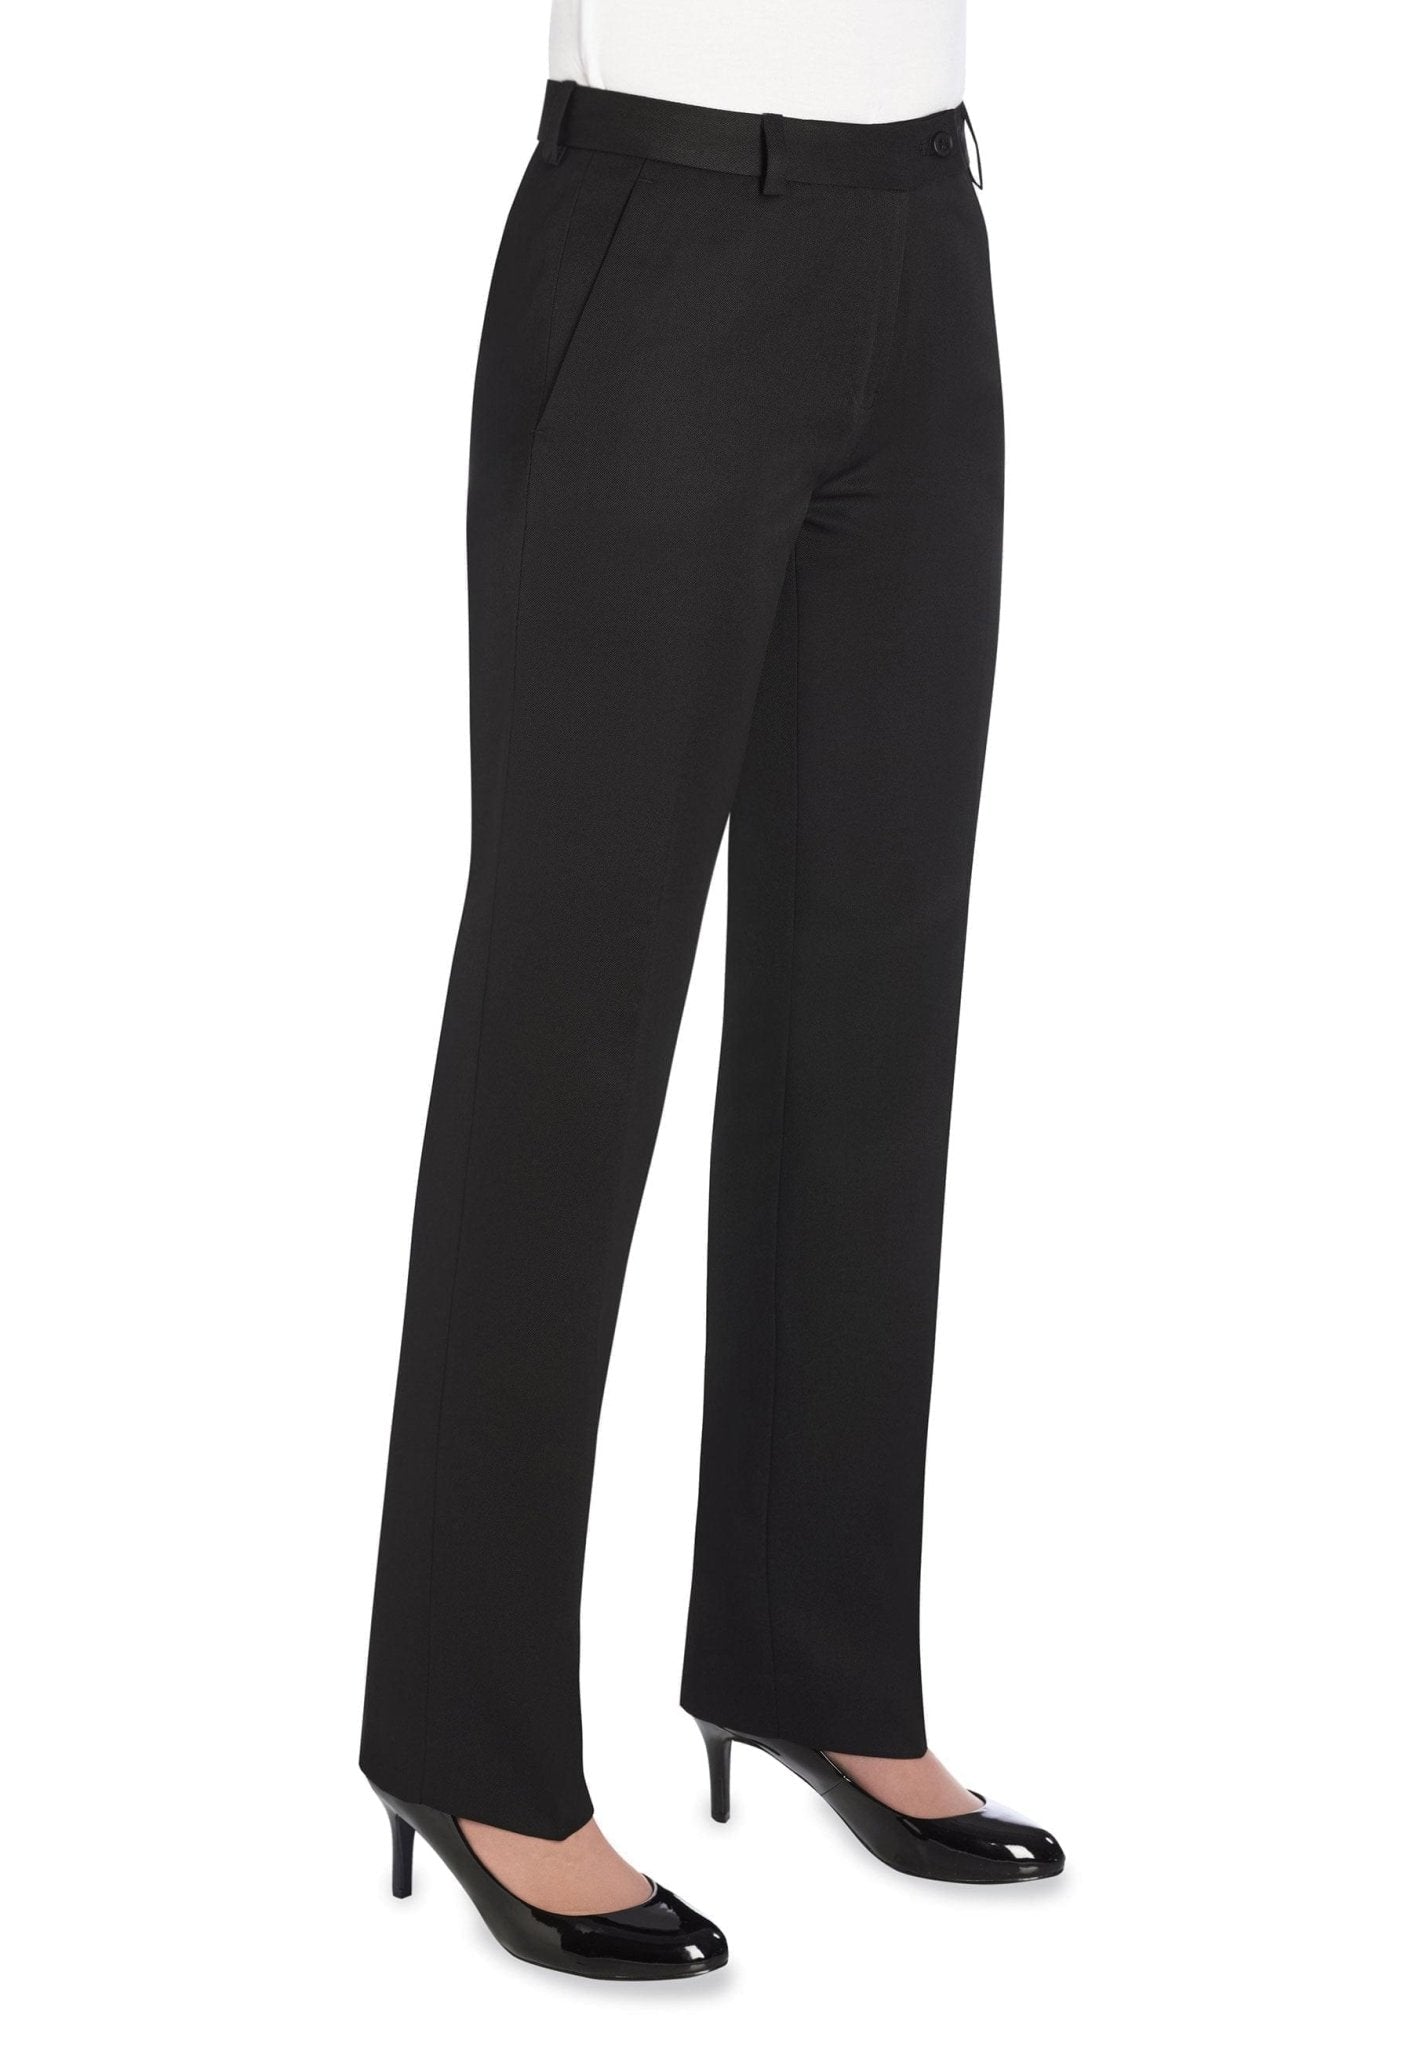 Brook Taverner Aura Women's Straight Leg Trousers - Navy or Charcoal ...